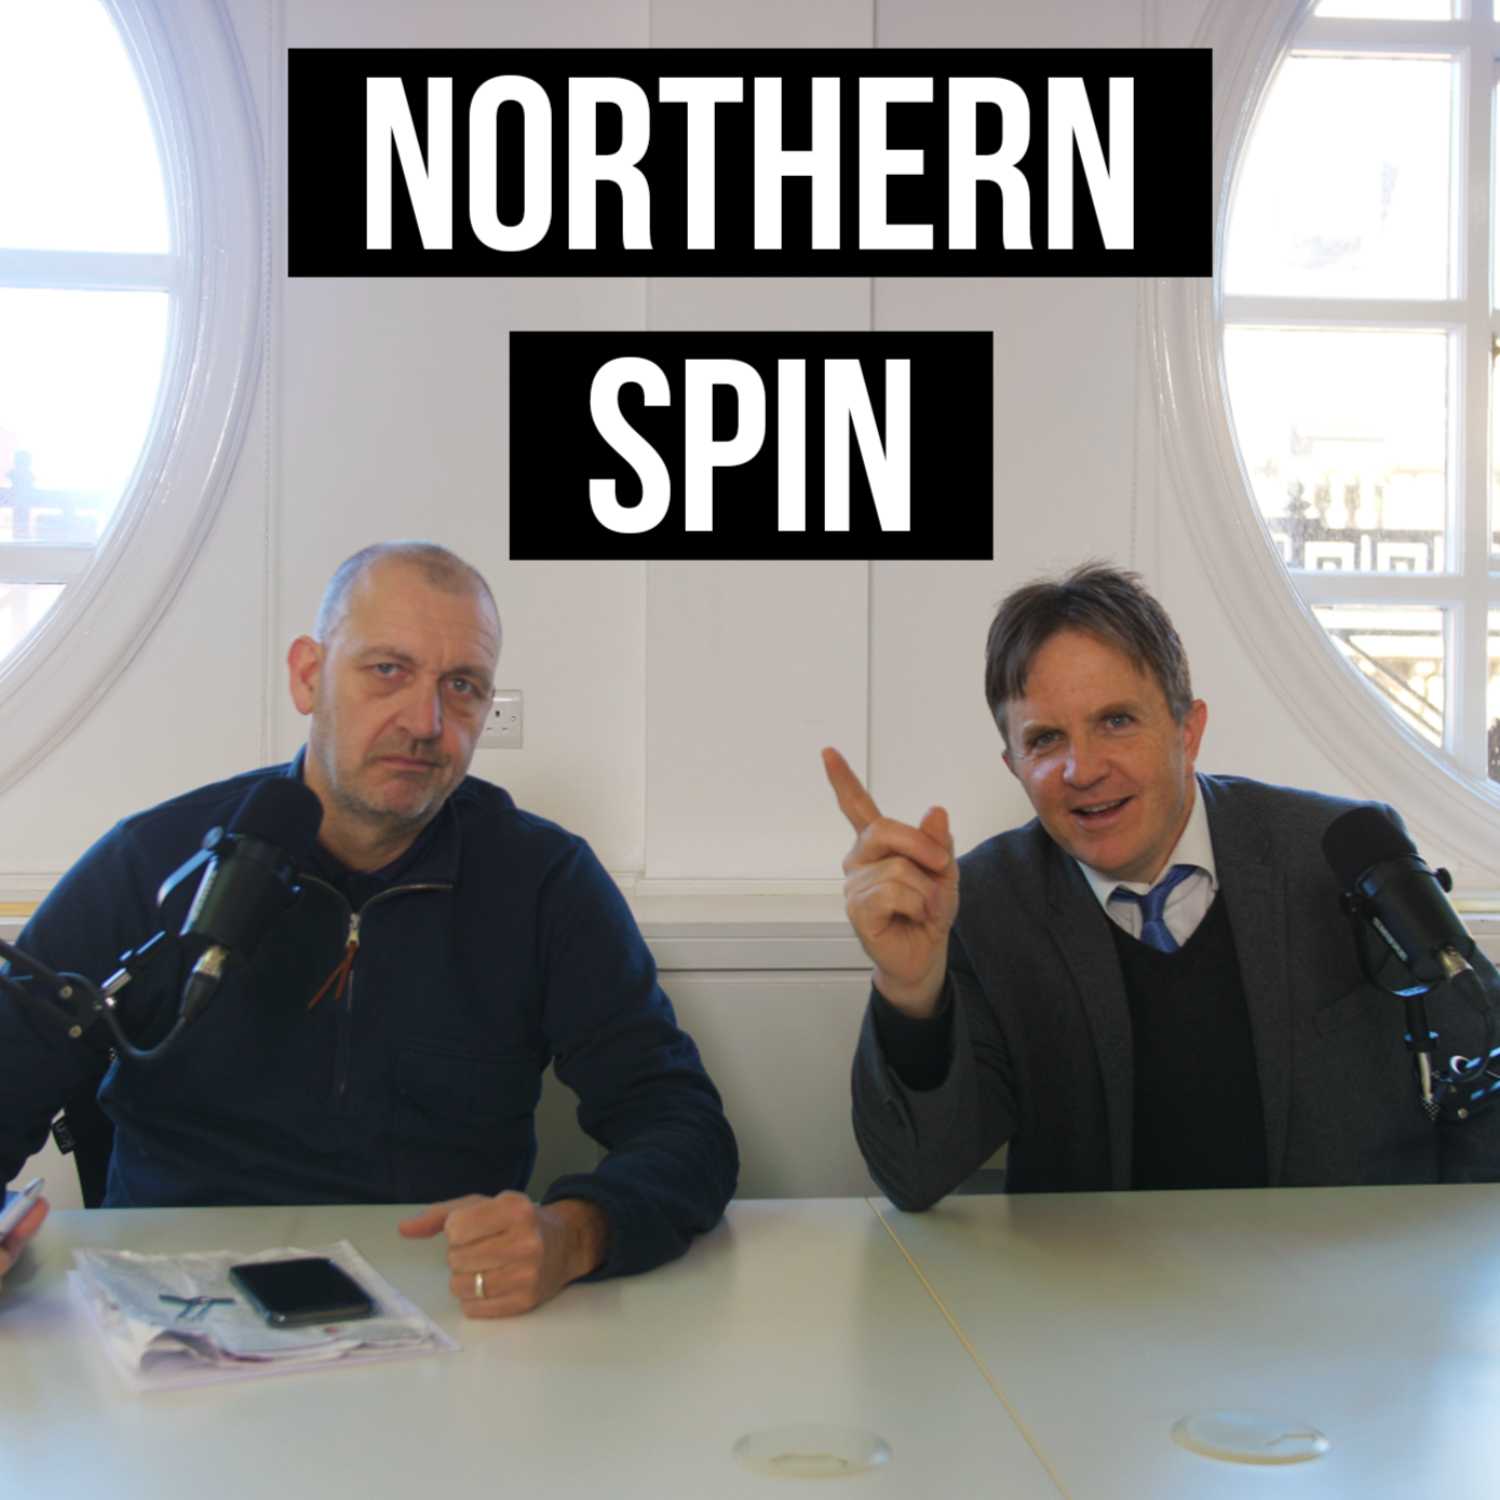 Northern Spin - Season 4 - Episode 5: Labour Under the Cosh